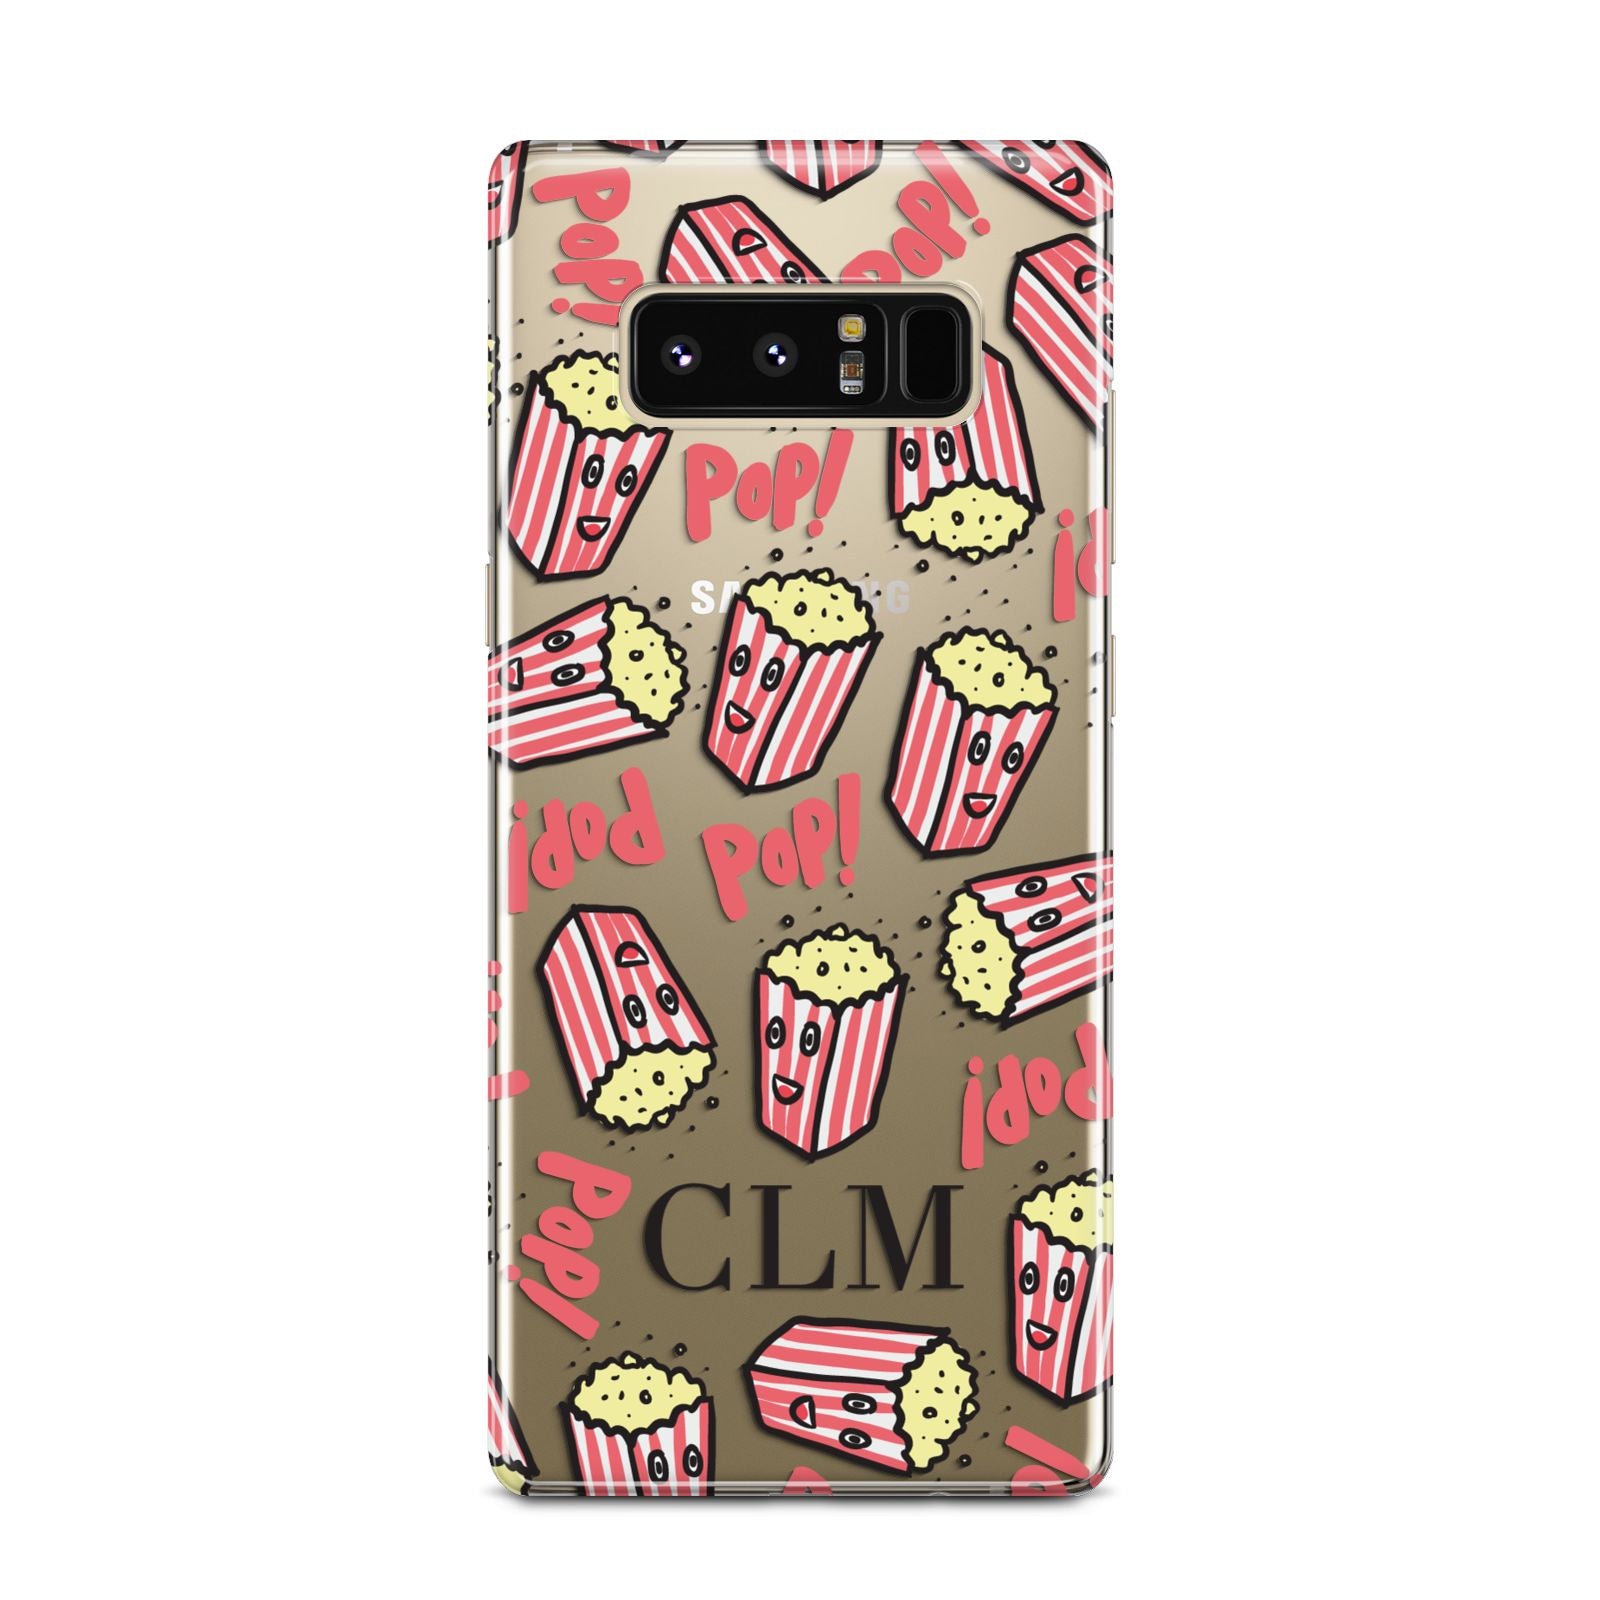 Personalised Popcorn Initials Samsung Galaxy Note 8 Case